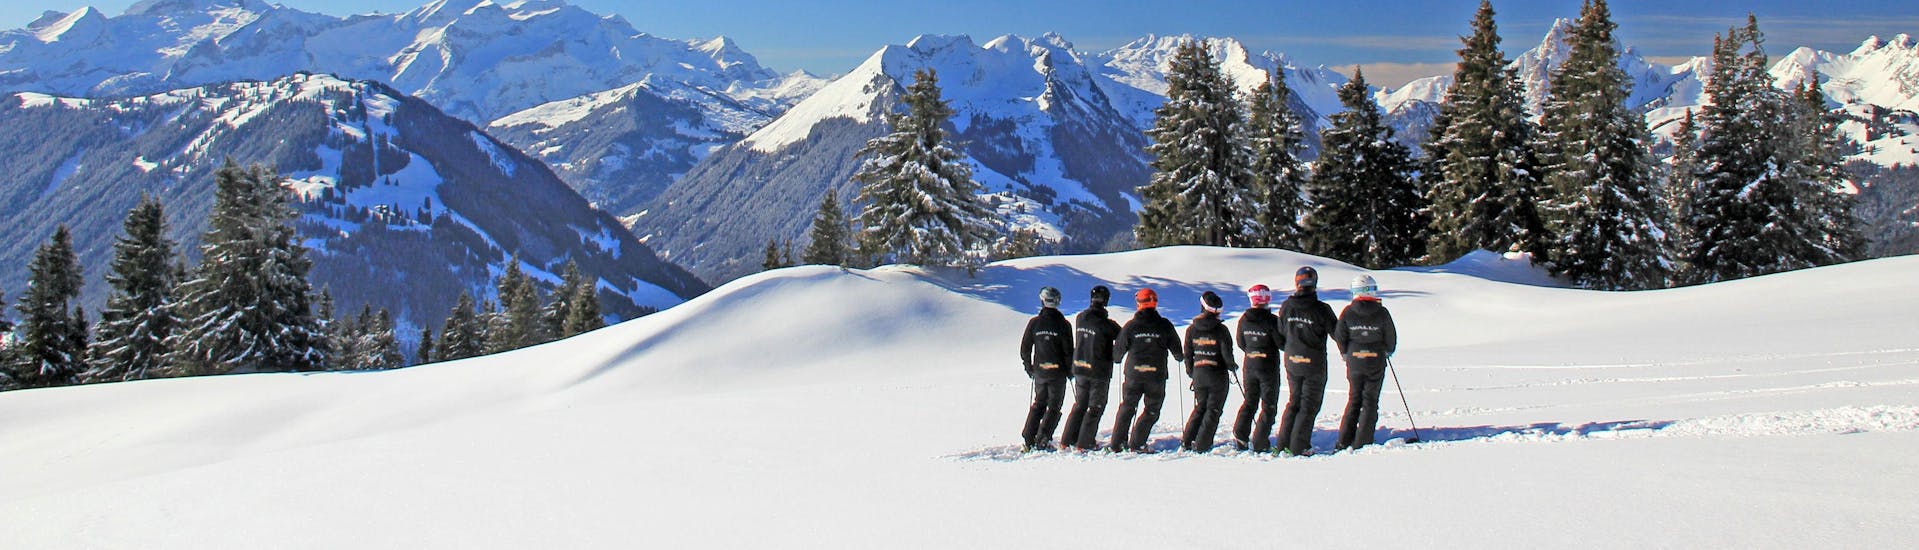 Private Ski Lessons for Adults of All Levels - Afternoon with Private Snowsports Team Gstaad - Hero image